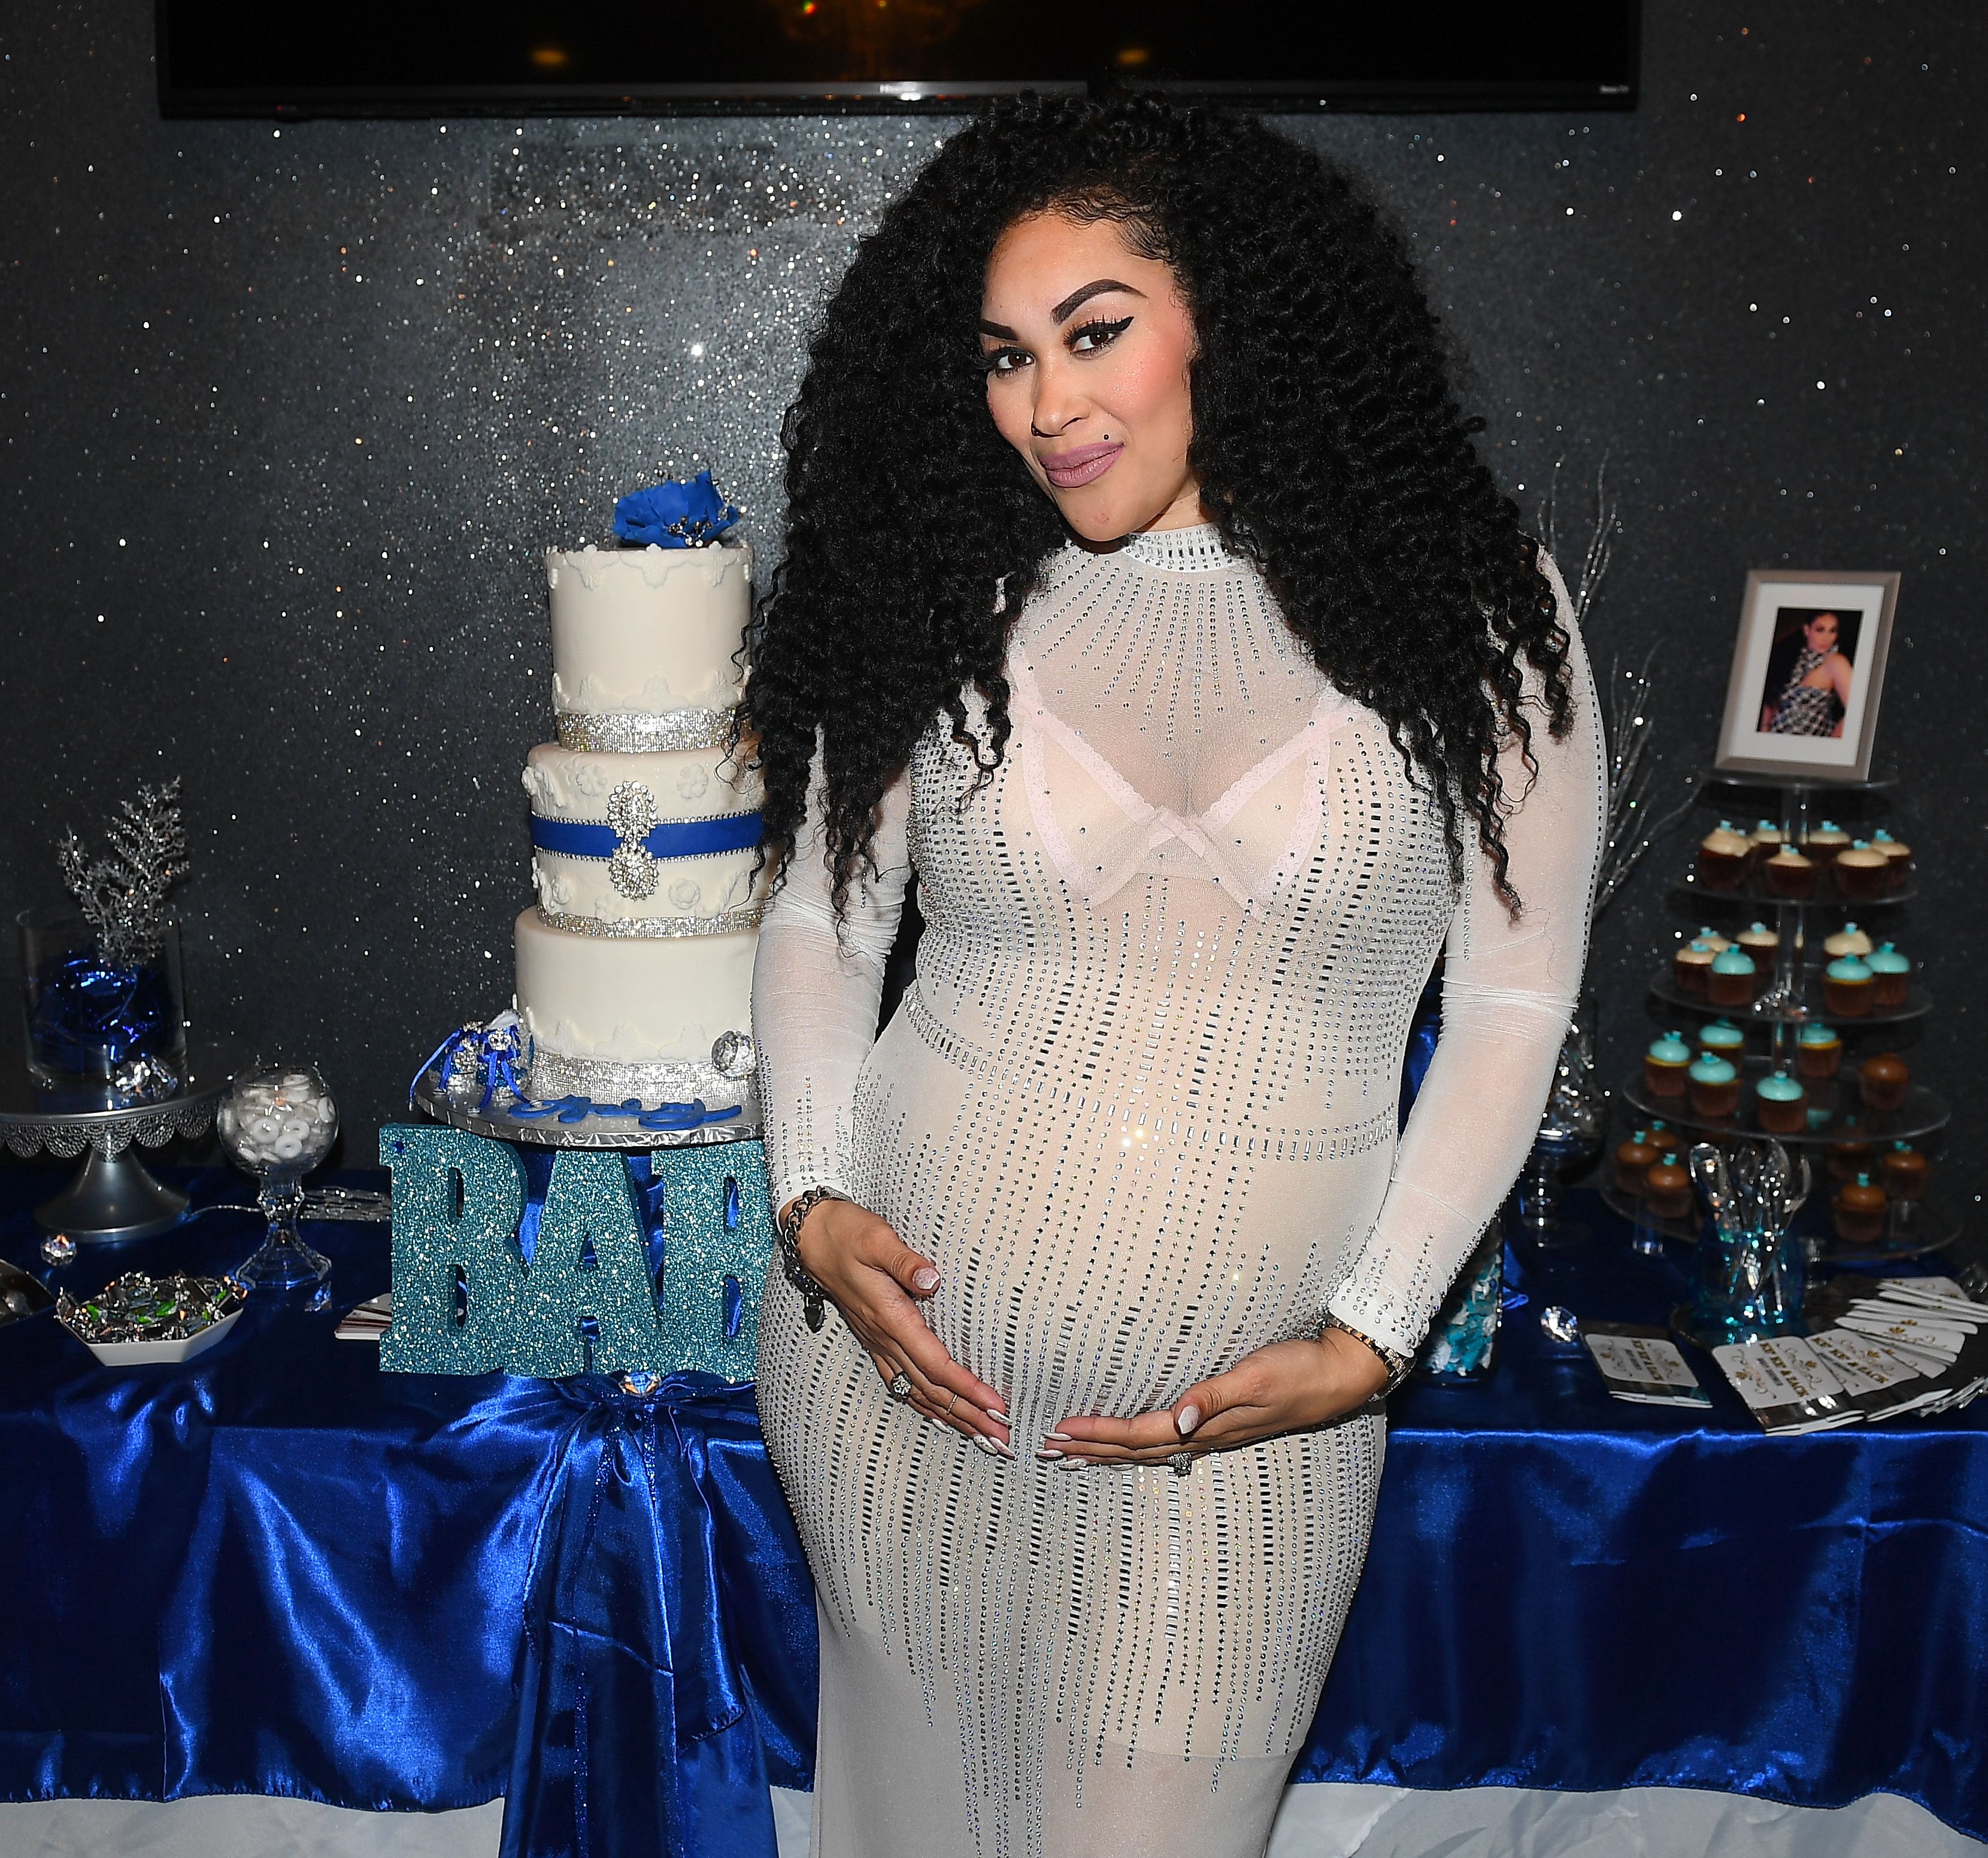 KeKe Wyatt at the baby shower for her 8th child in Atlanta on November 03, 2019. | Photo: Getty Images